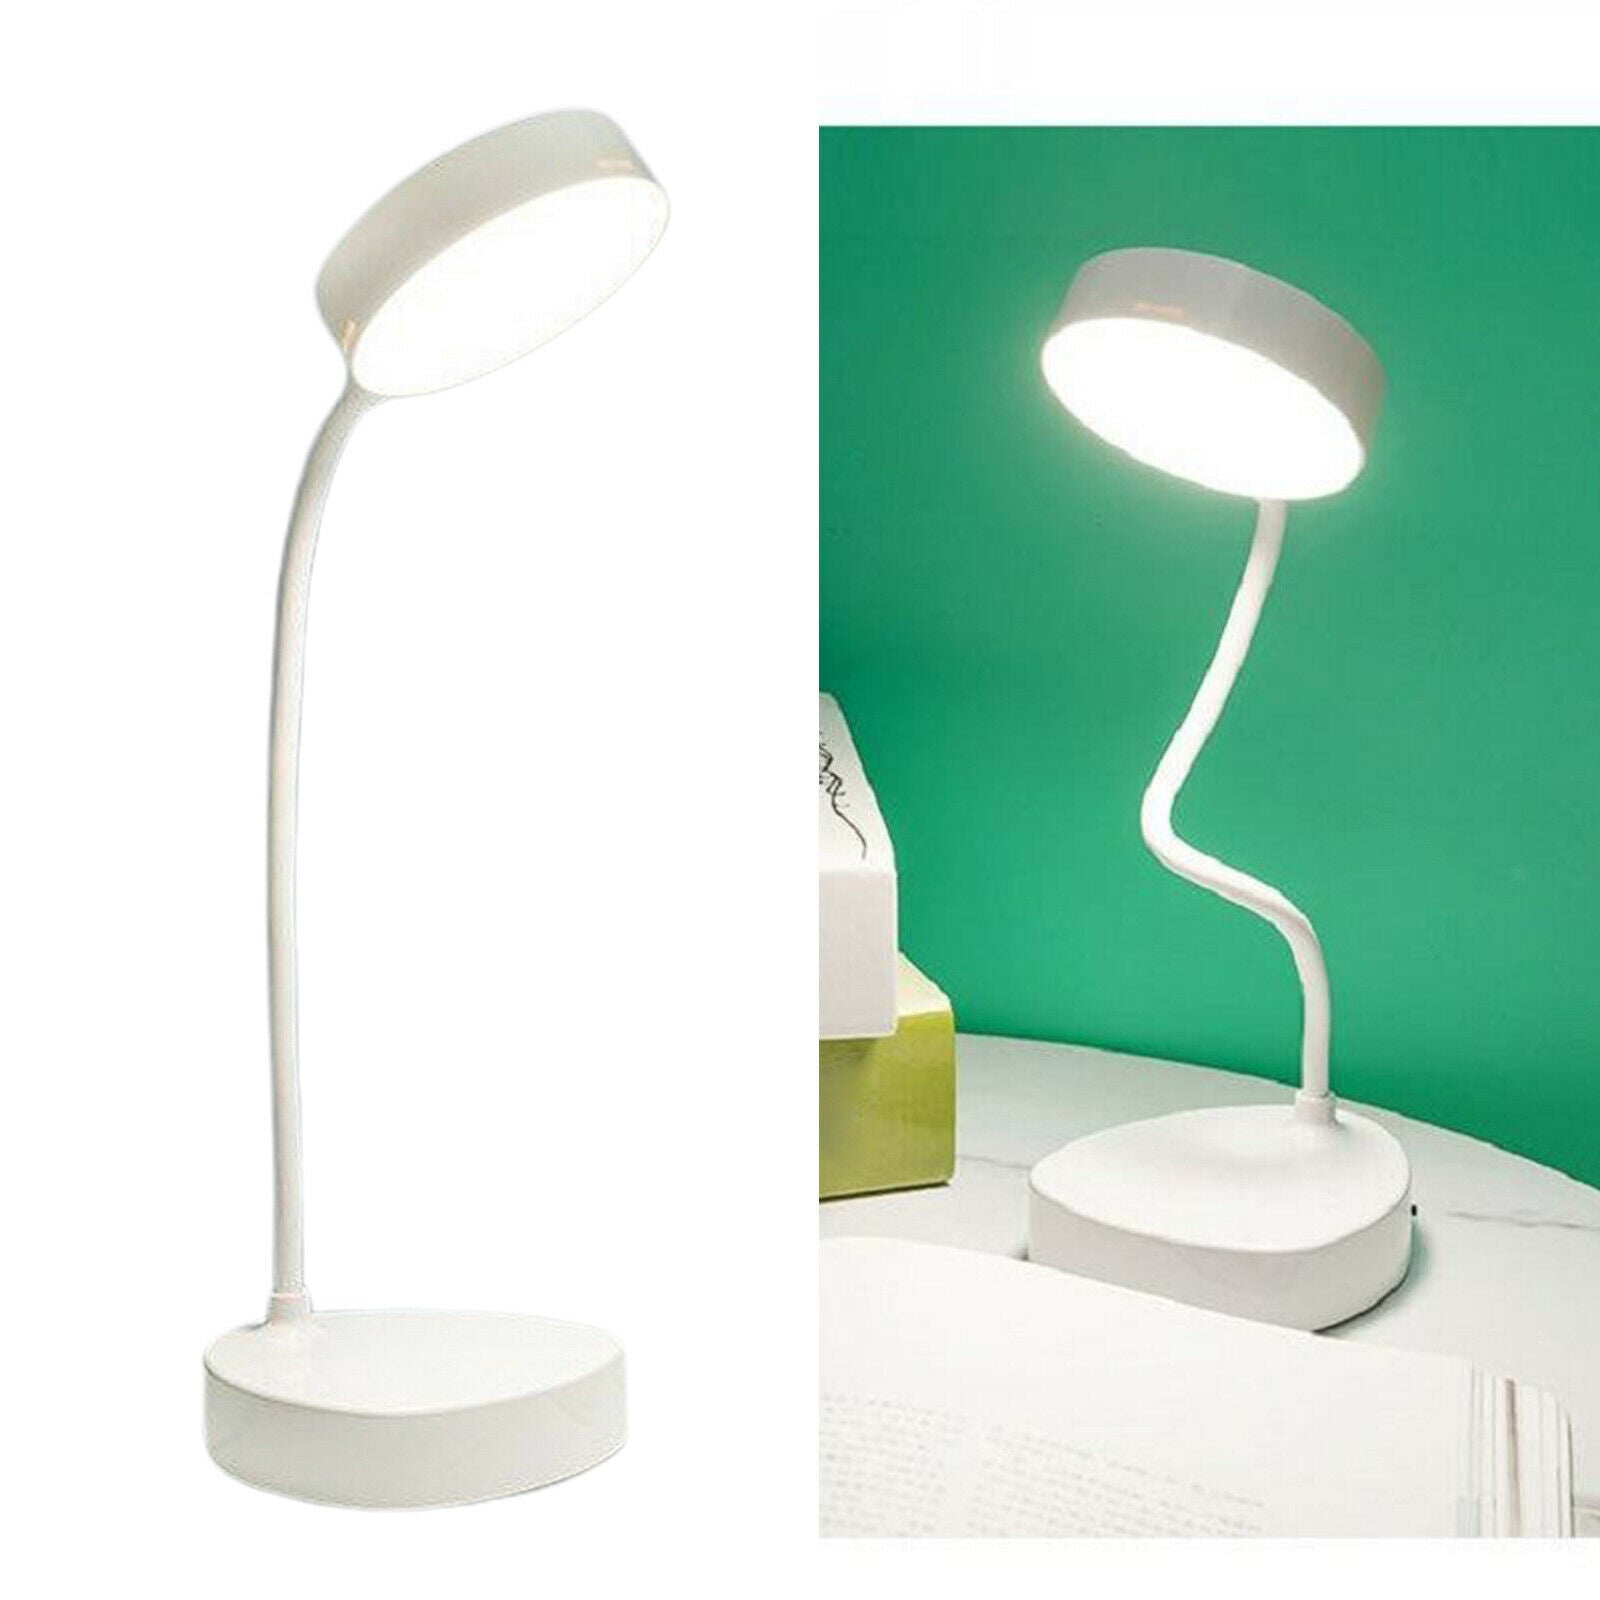 LED Desk Reading Lamp Light Touch Control Dimmable Nightlight USB Office